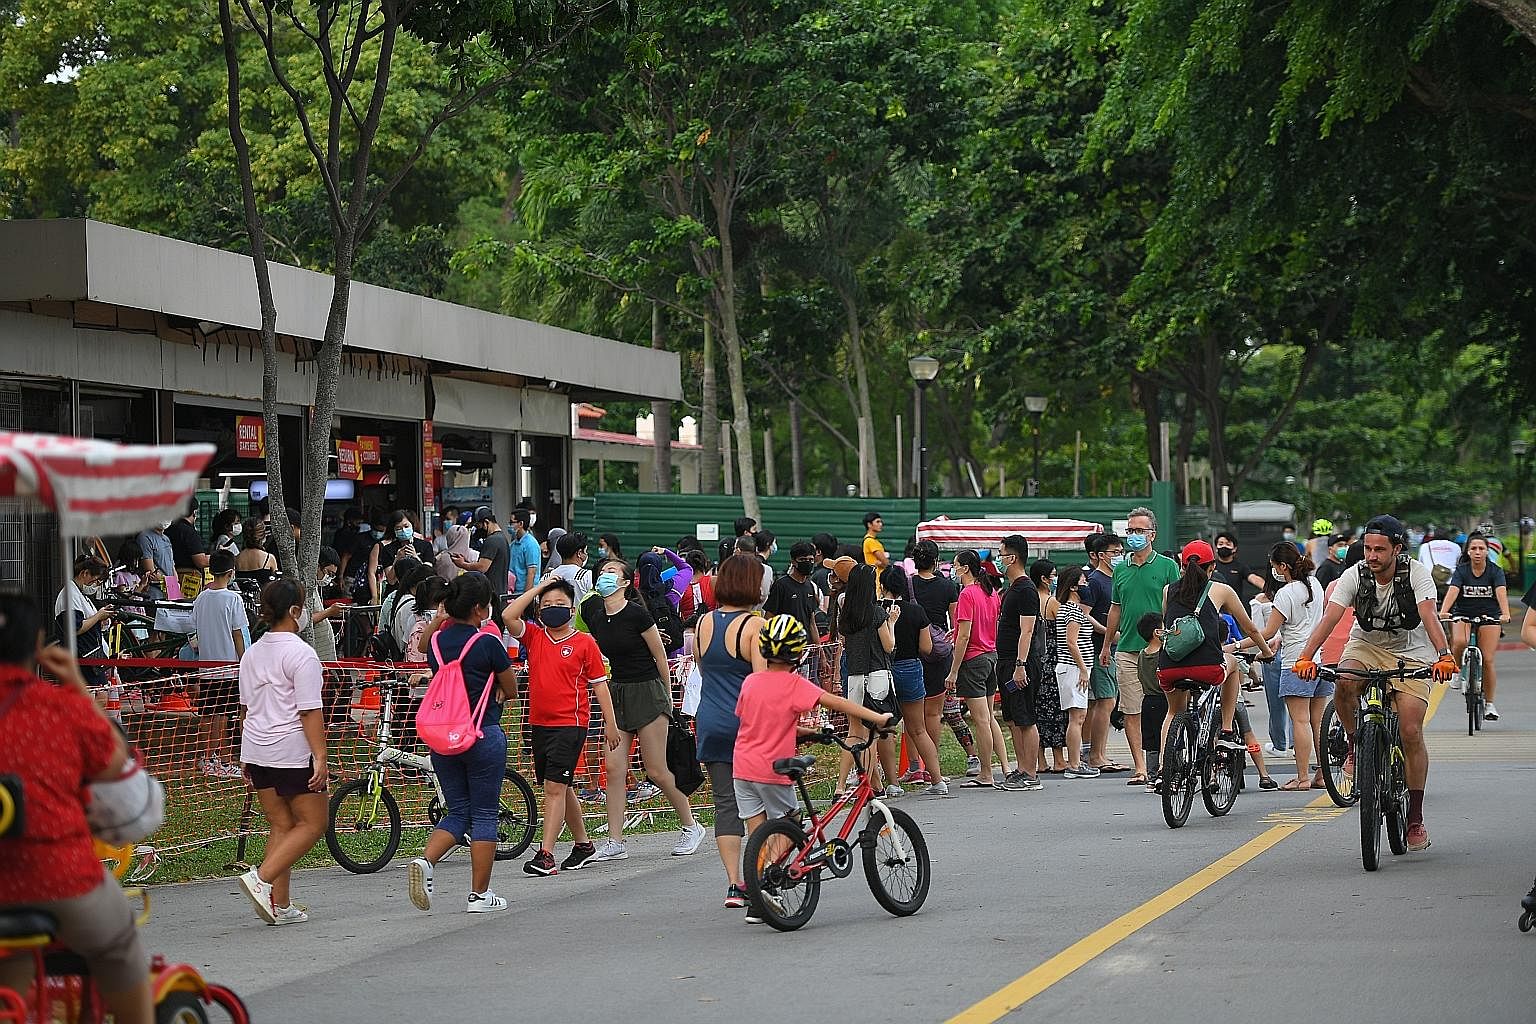 The lunch-time crowd in Bugis Street on Tuesday. More travellers are expected as Singapore gradually reopens its borders. The bustle near a bicycle rental shop in East Coast Park last Friday. Covid-19 task force co-chair Lawrence Wong said Singapore 